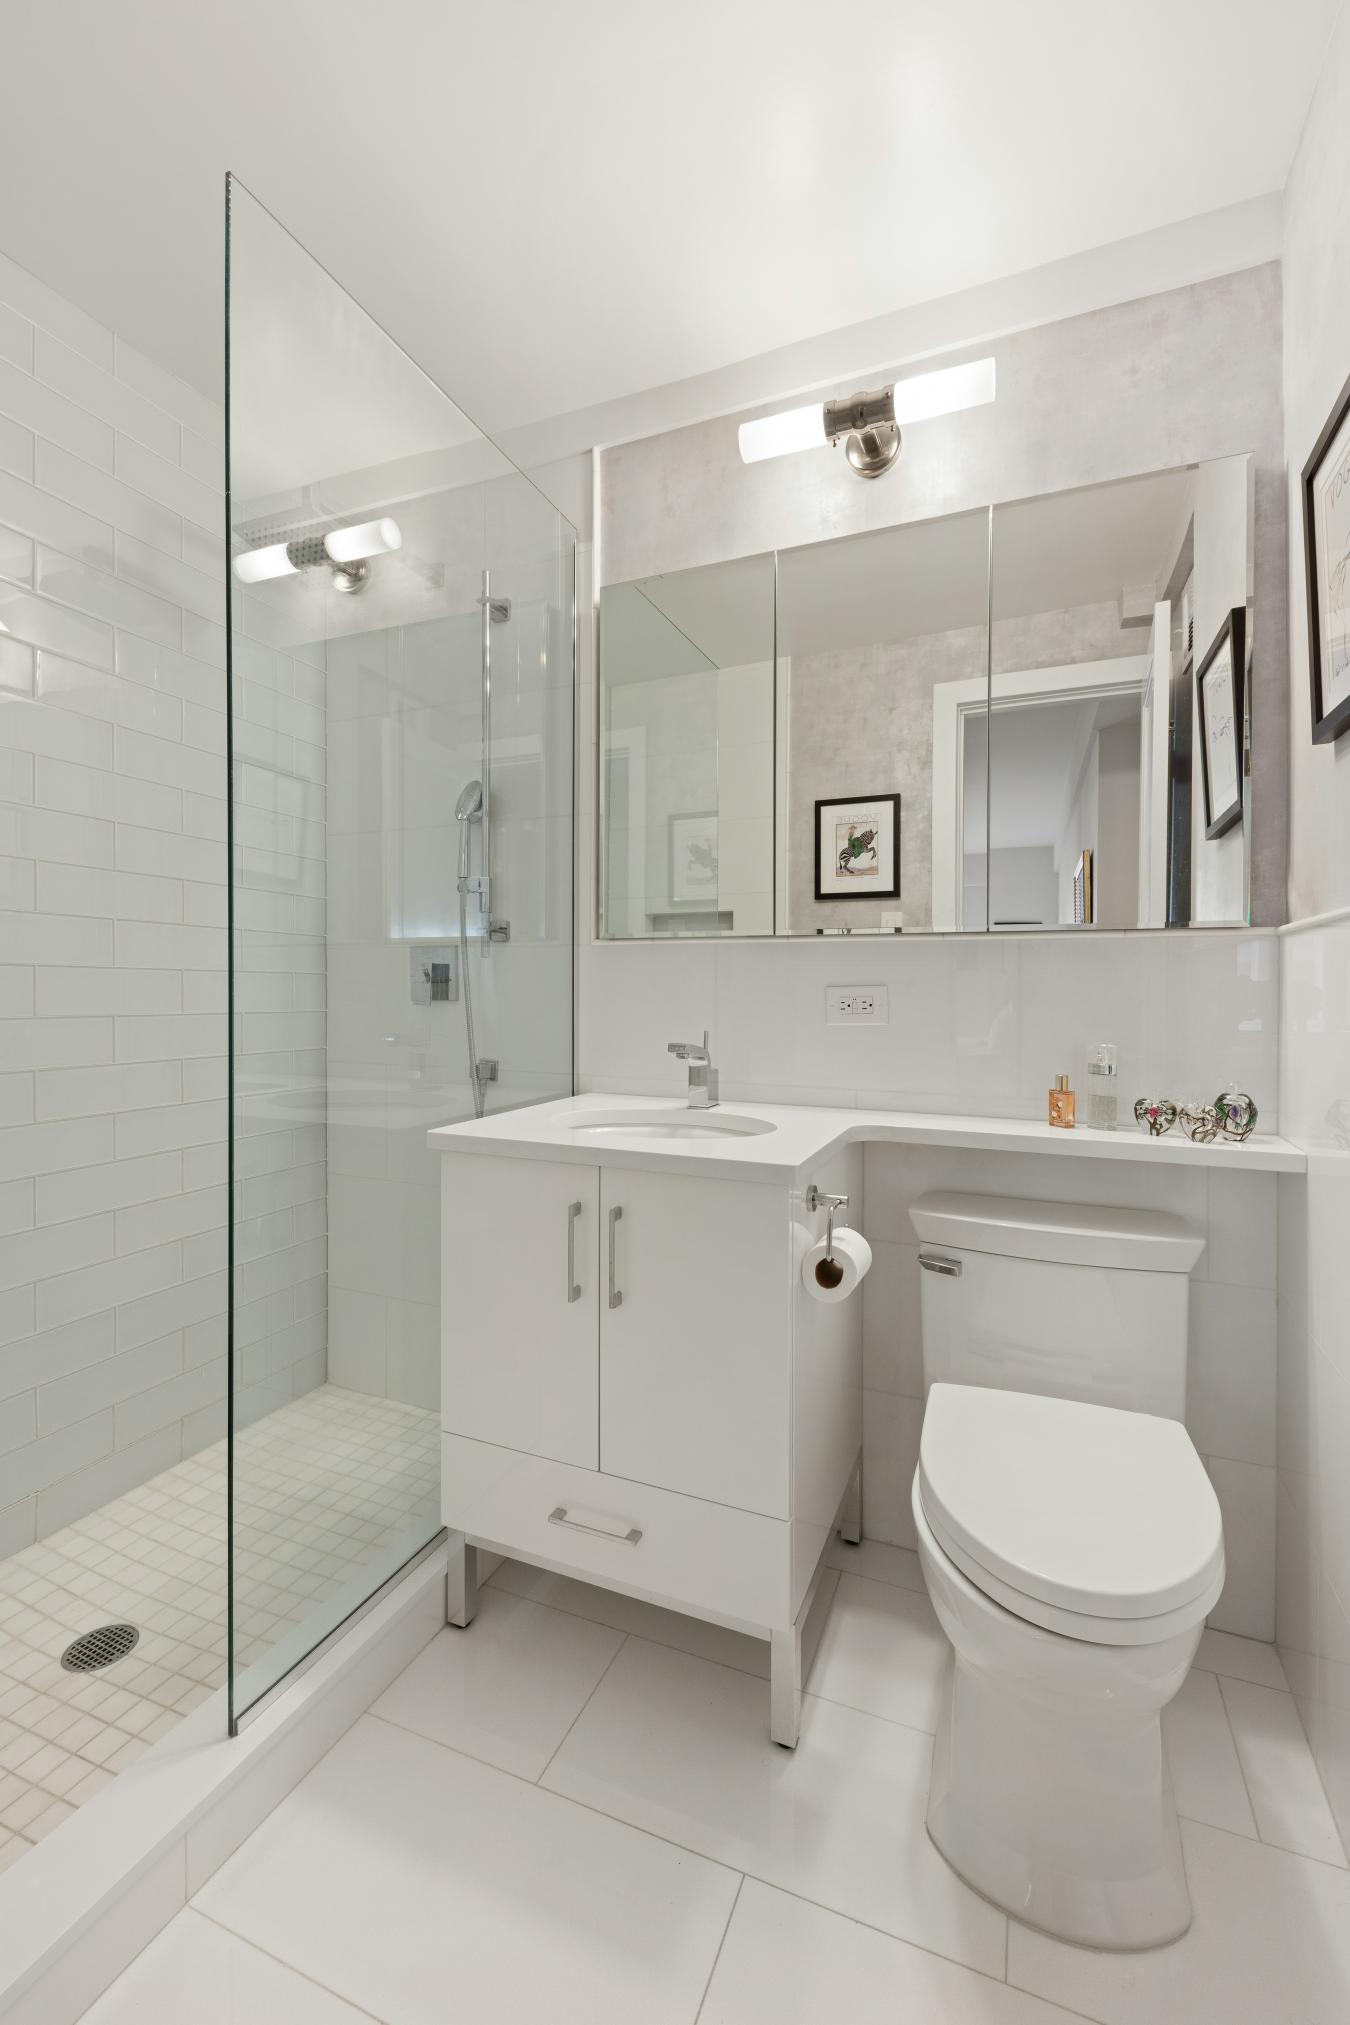 440 East 56th Street, New York, New York, 10022, United States, 2 Bedrooms Bedrooms, ,2 BathroomsBathrooms,Residential,For Sale,440 East 56th Street,1508149